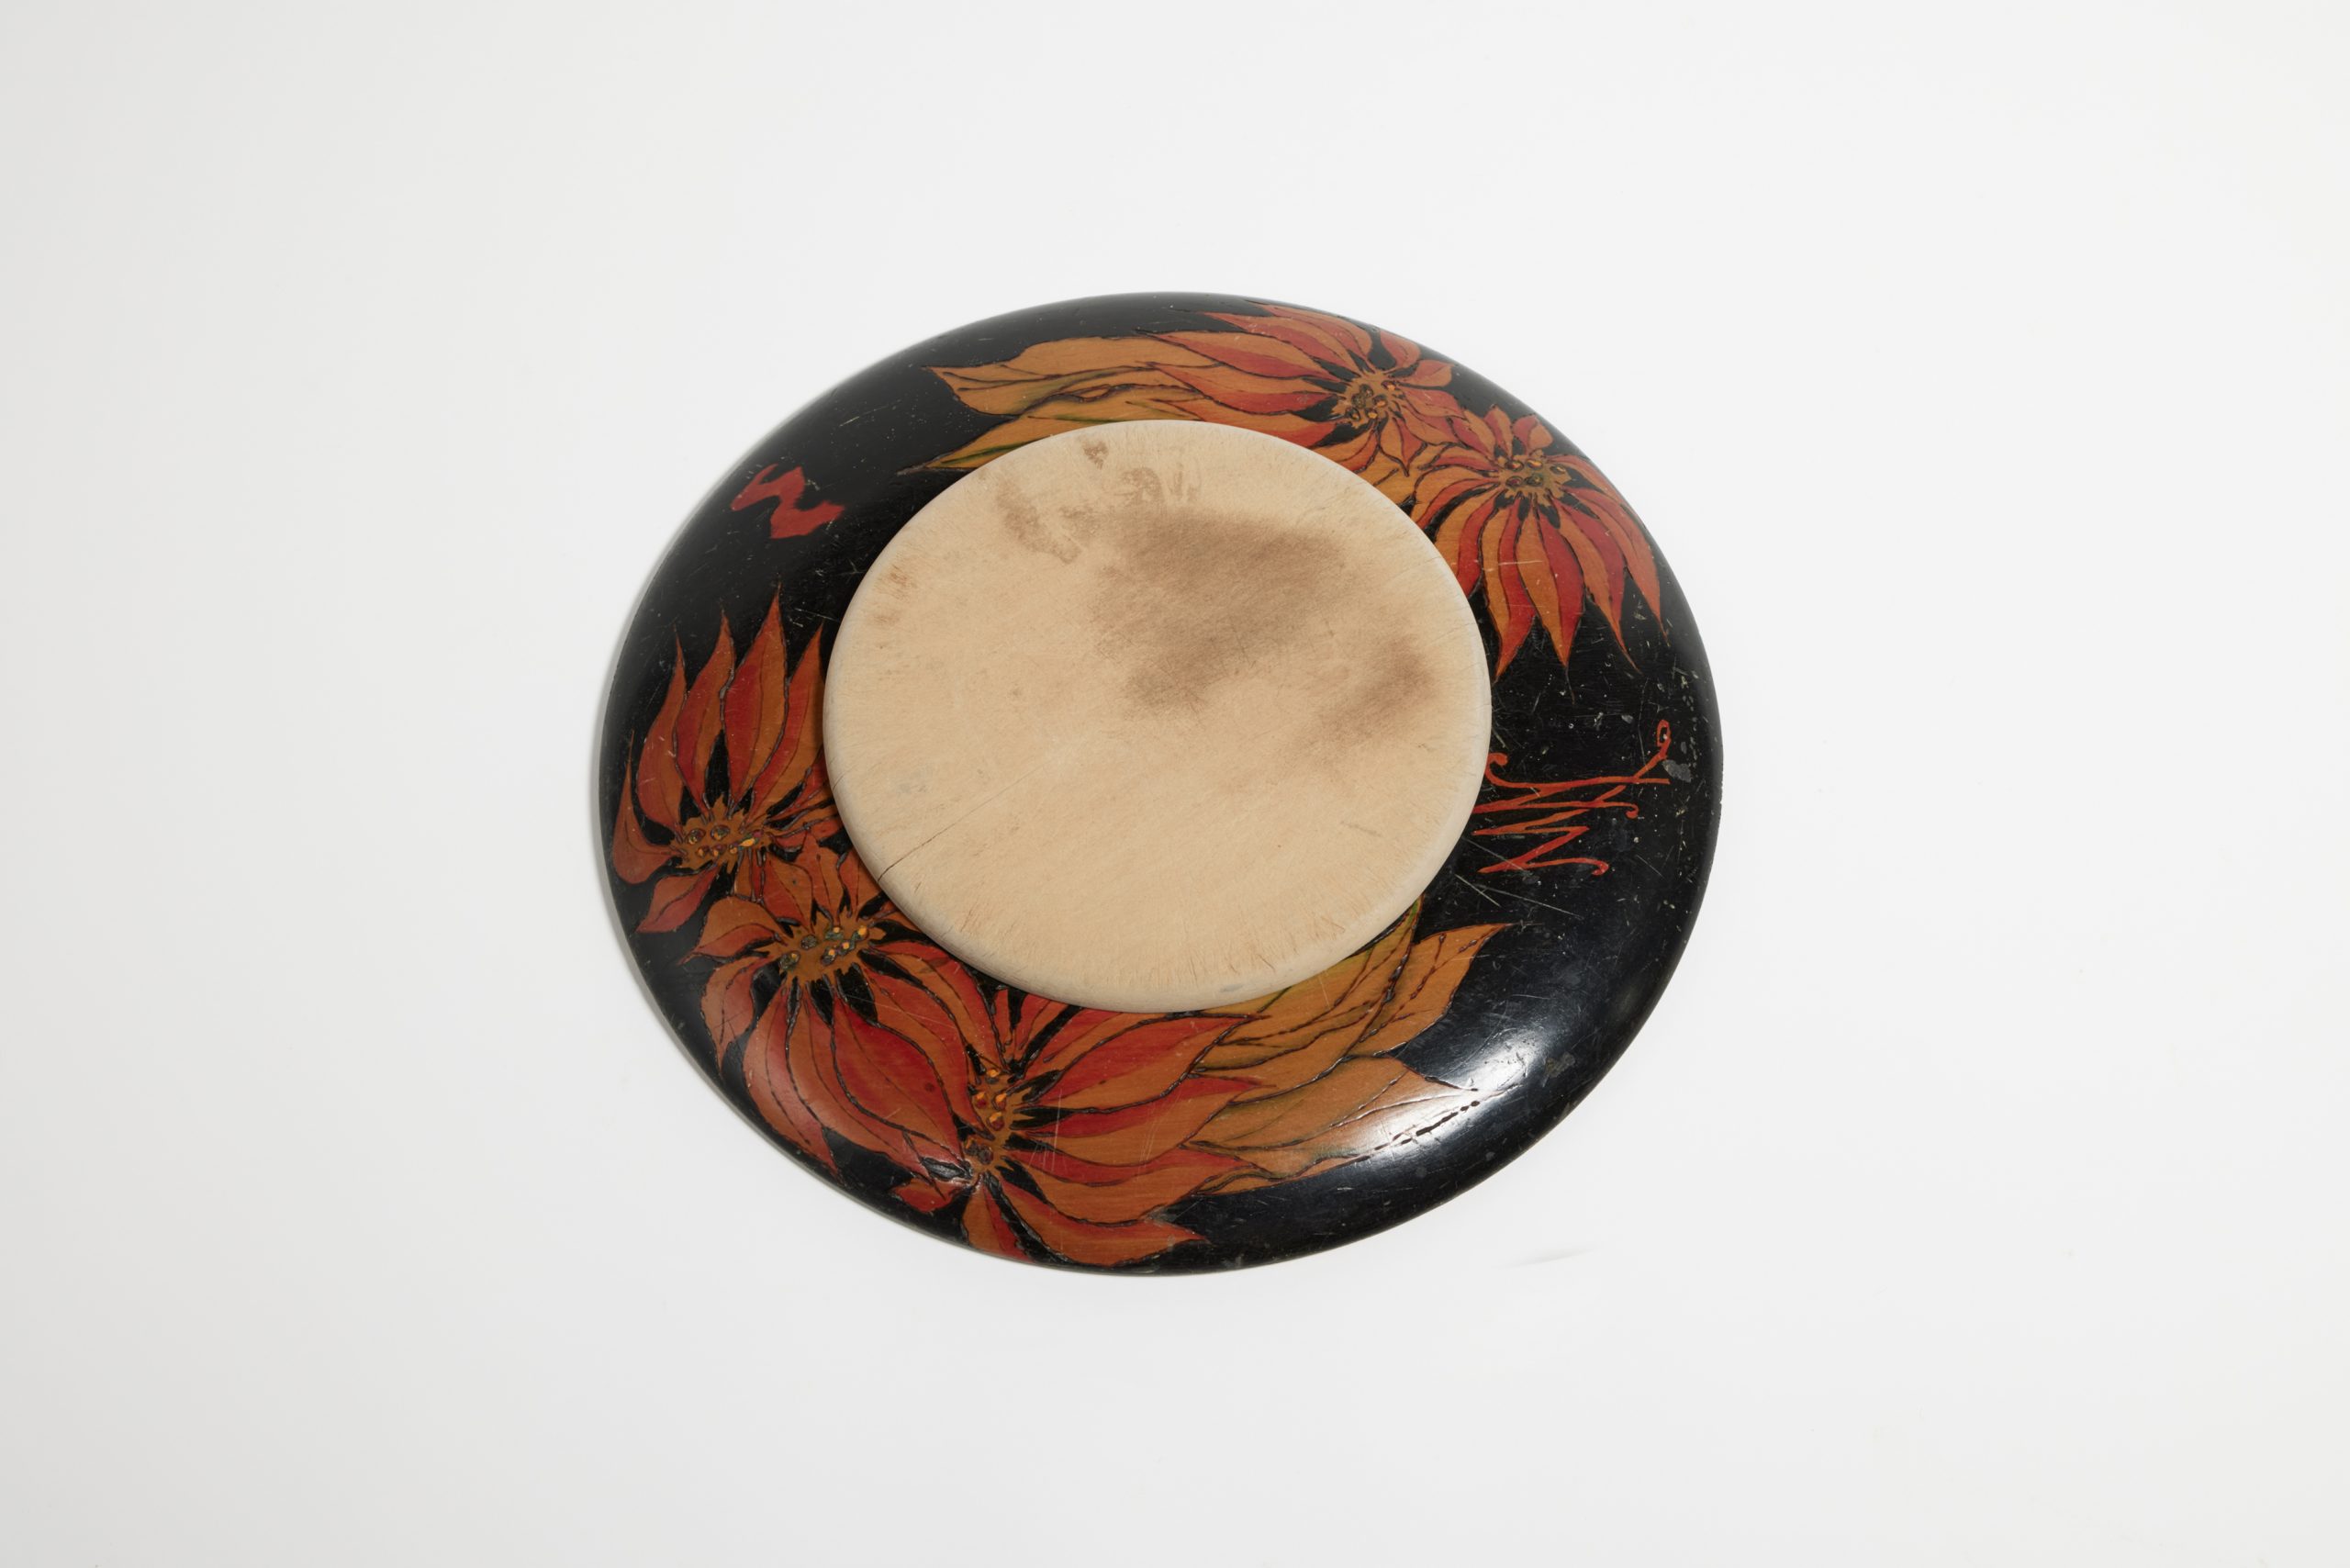 Circular breadboard with chopping board; design of poinsettia flowers burned into the wood